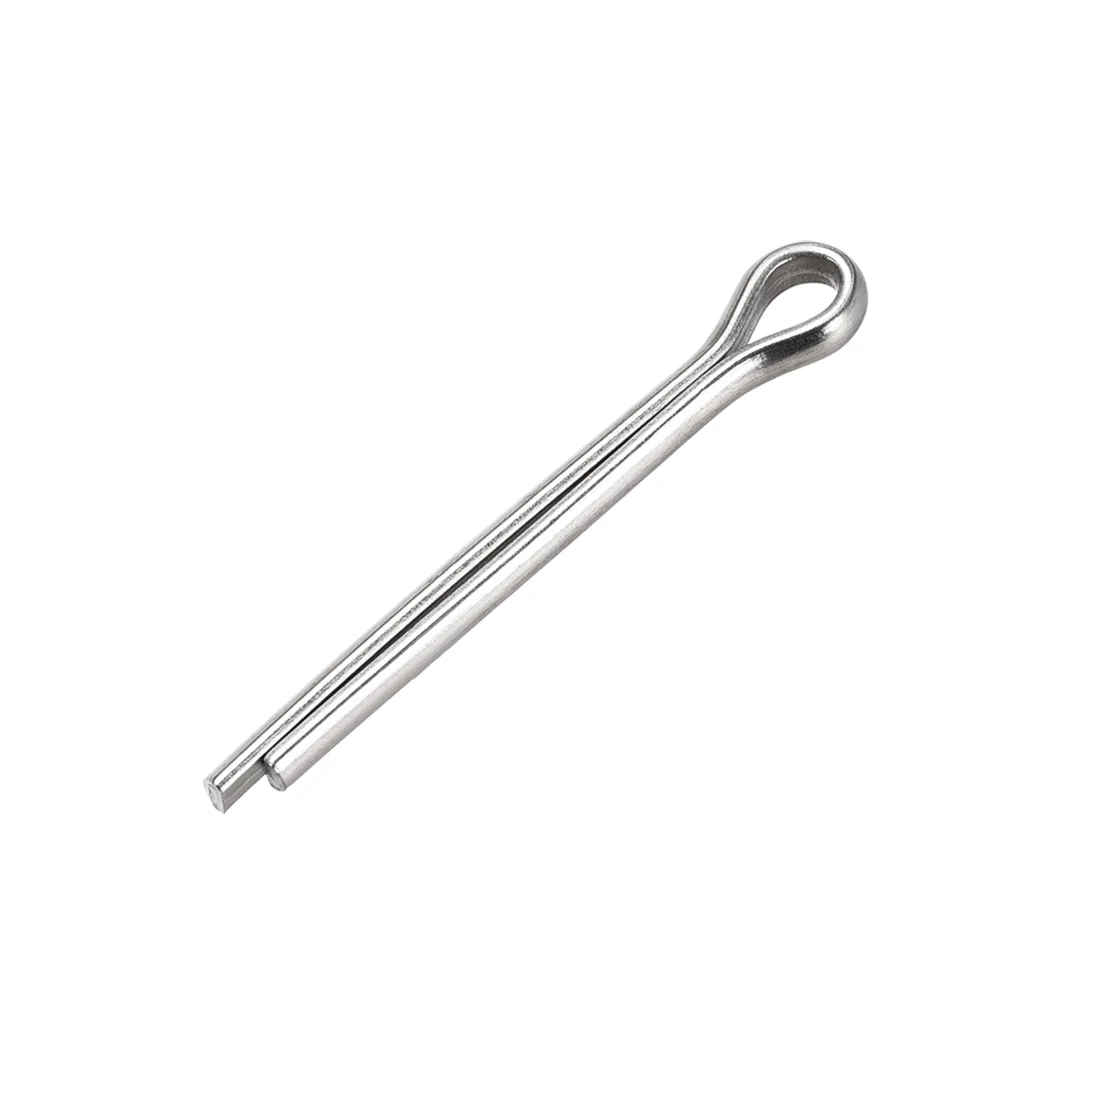 

uxcell 15Pcs Split Cotter Pin - 5mm x 45mm 304 Stainless Steel 2-Prongs Silver Tone for Secure Clevis Pins,Castle Nuts